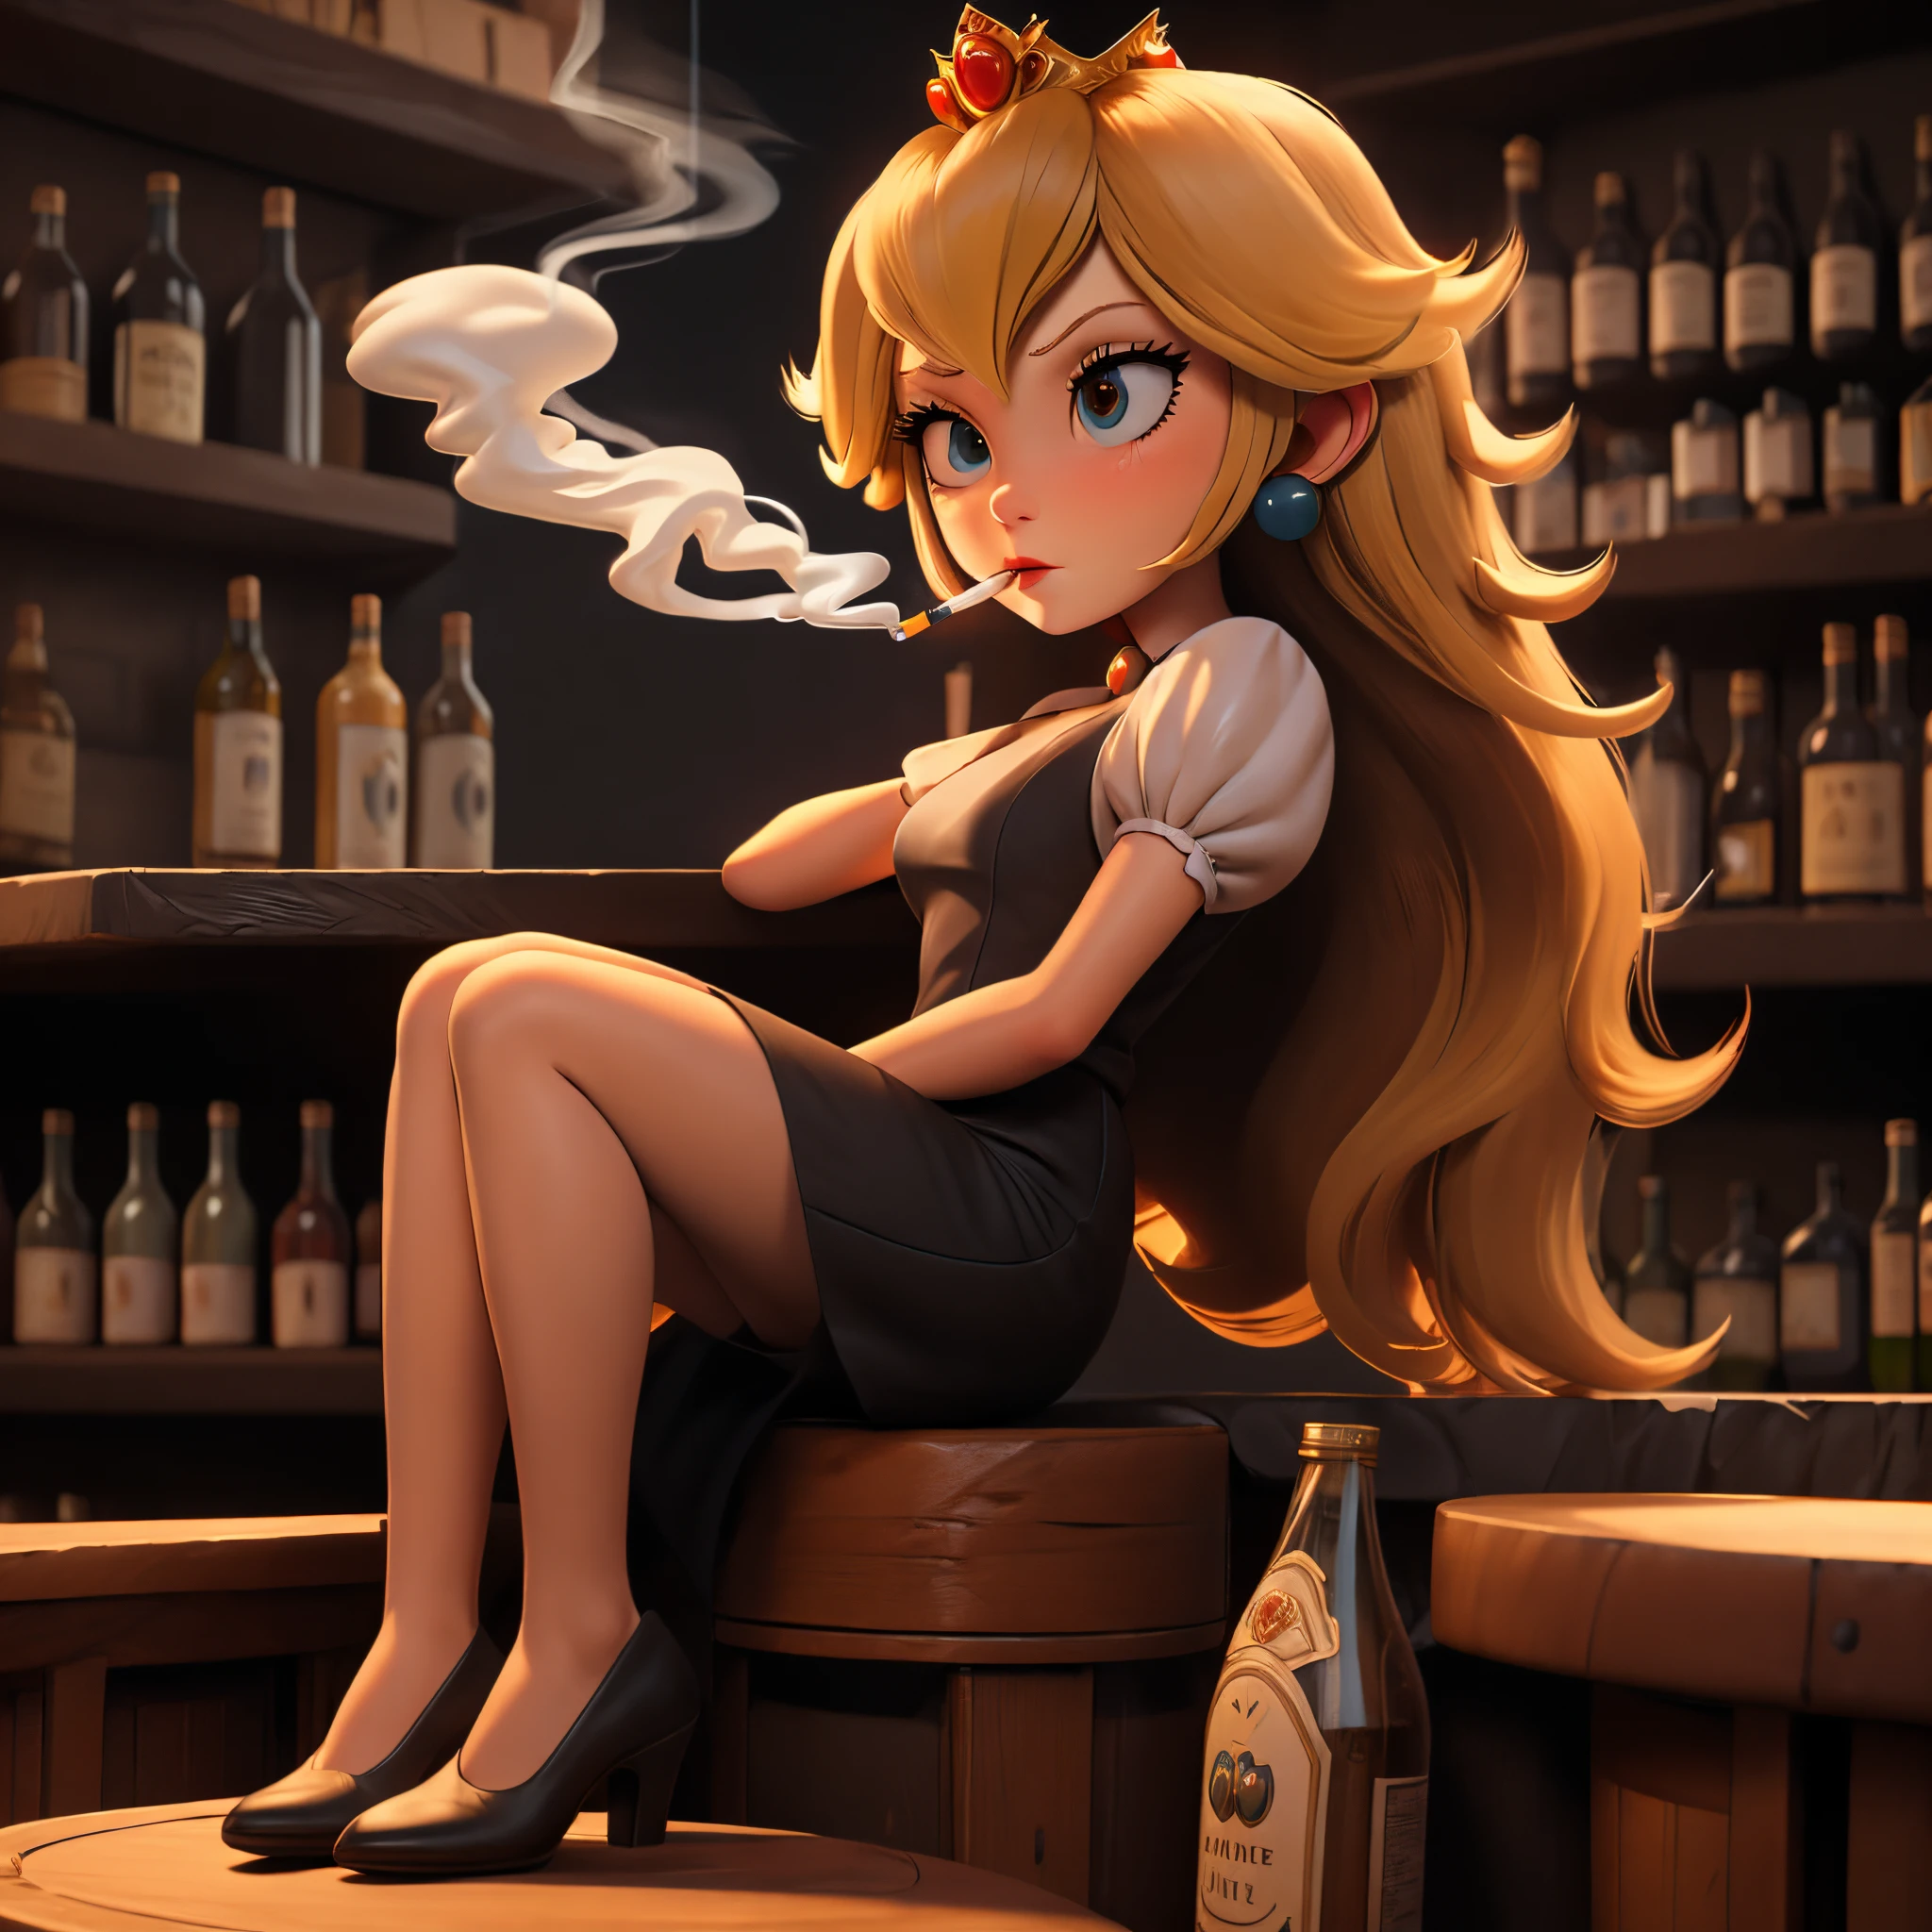 Princess Peach smoking in a dark bar, thoughtful facial expression, Business suit, Film noir, Full body shot, Sitting at the bar, Vintage bottles,